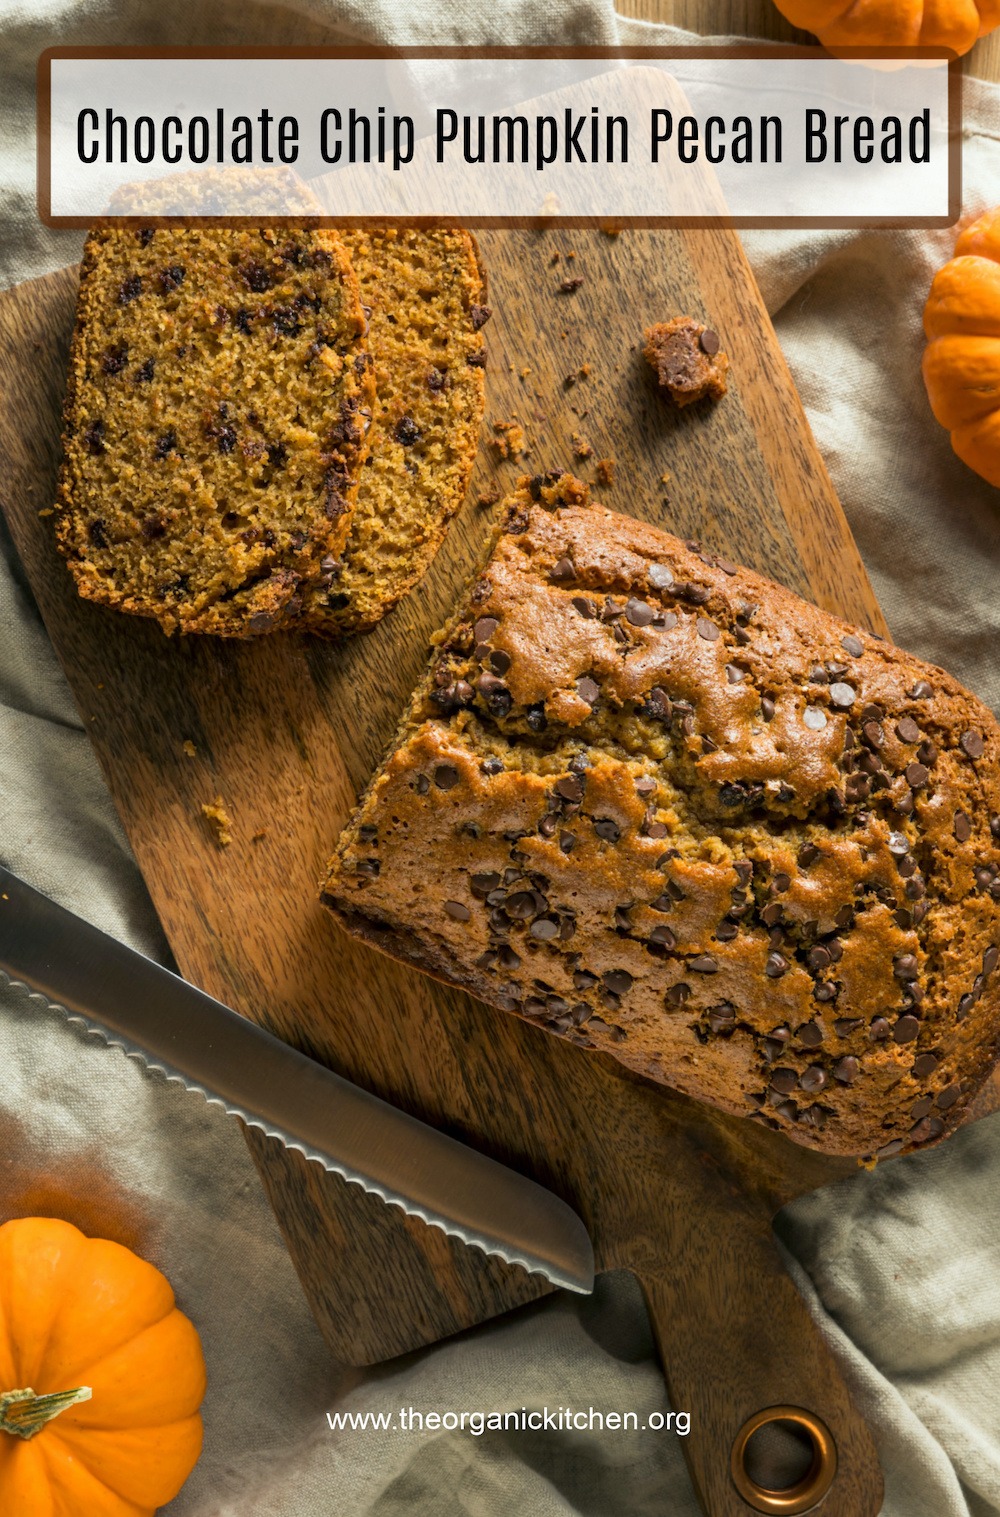 Chocolate Chip Pumpkin Pecan Bread (gluten free option) on wood cutting board surrounded by small pumpkins